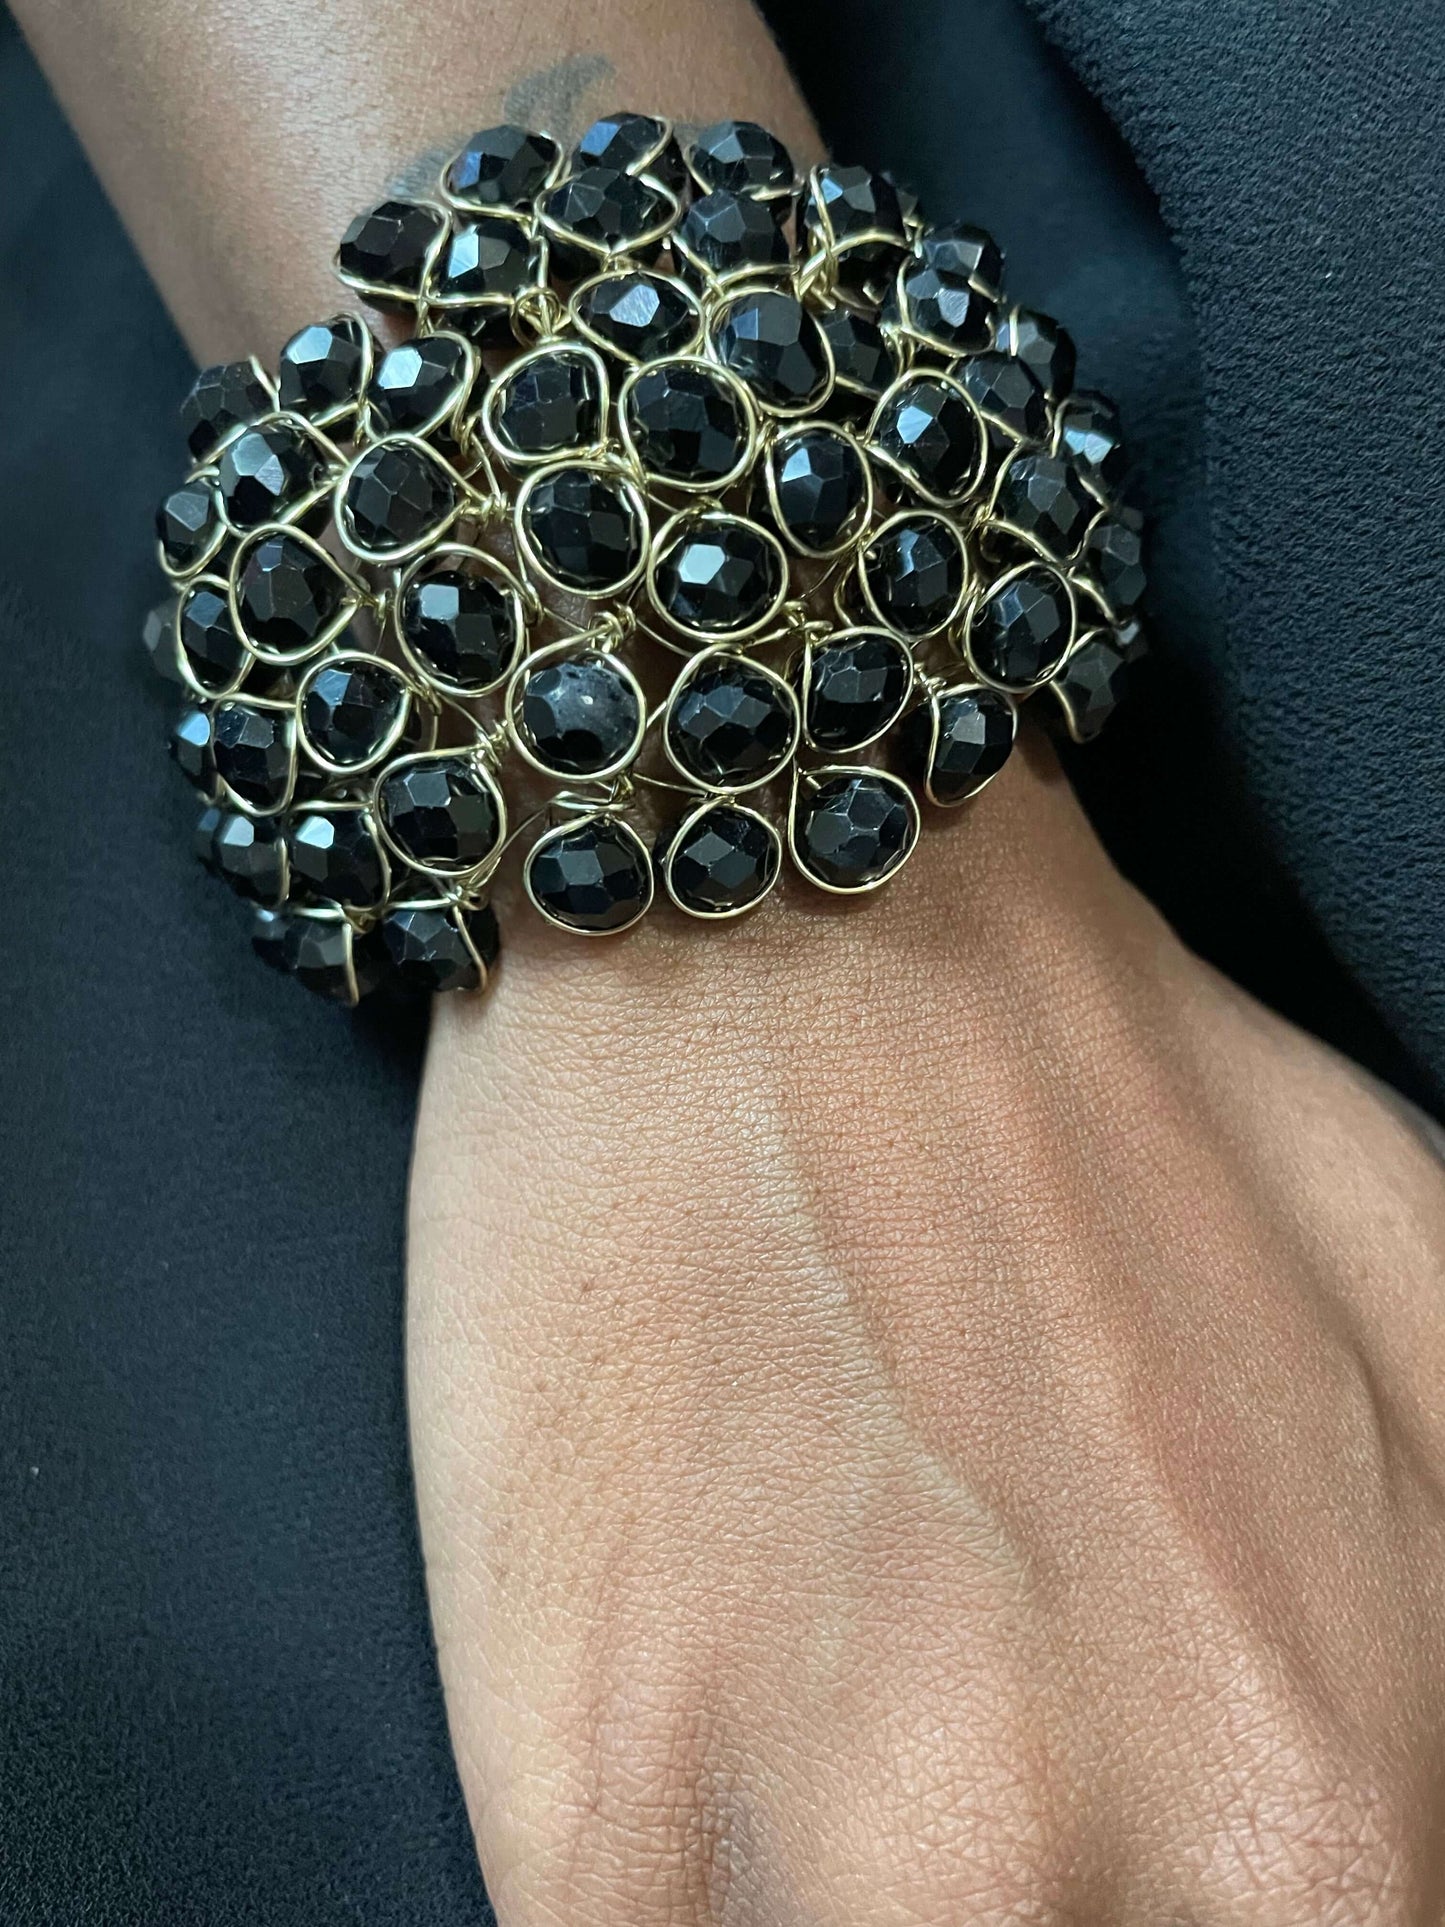 Bracelet & ring handcrafted adjustable jewelry in black beads